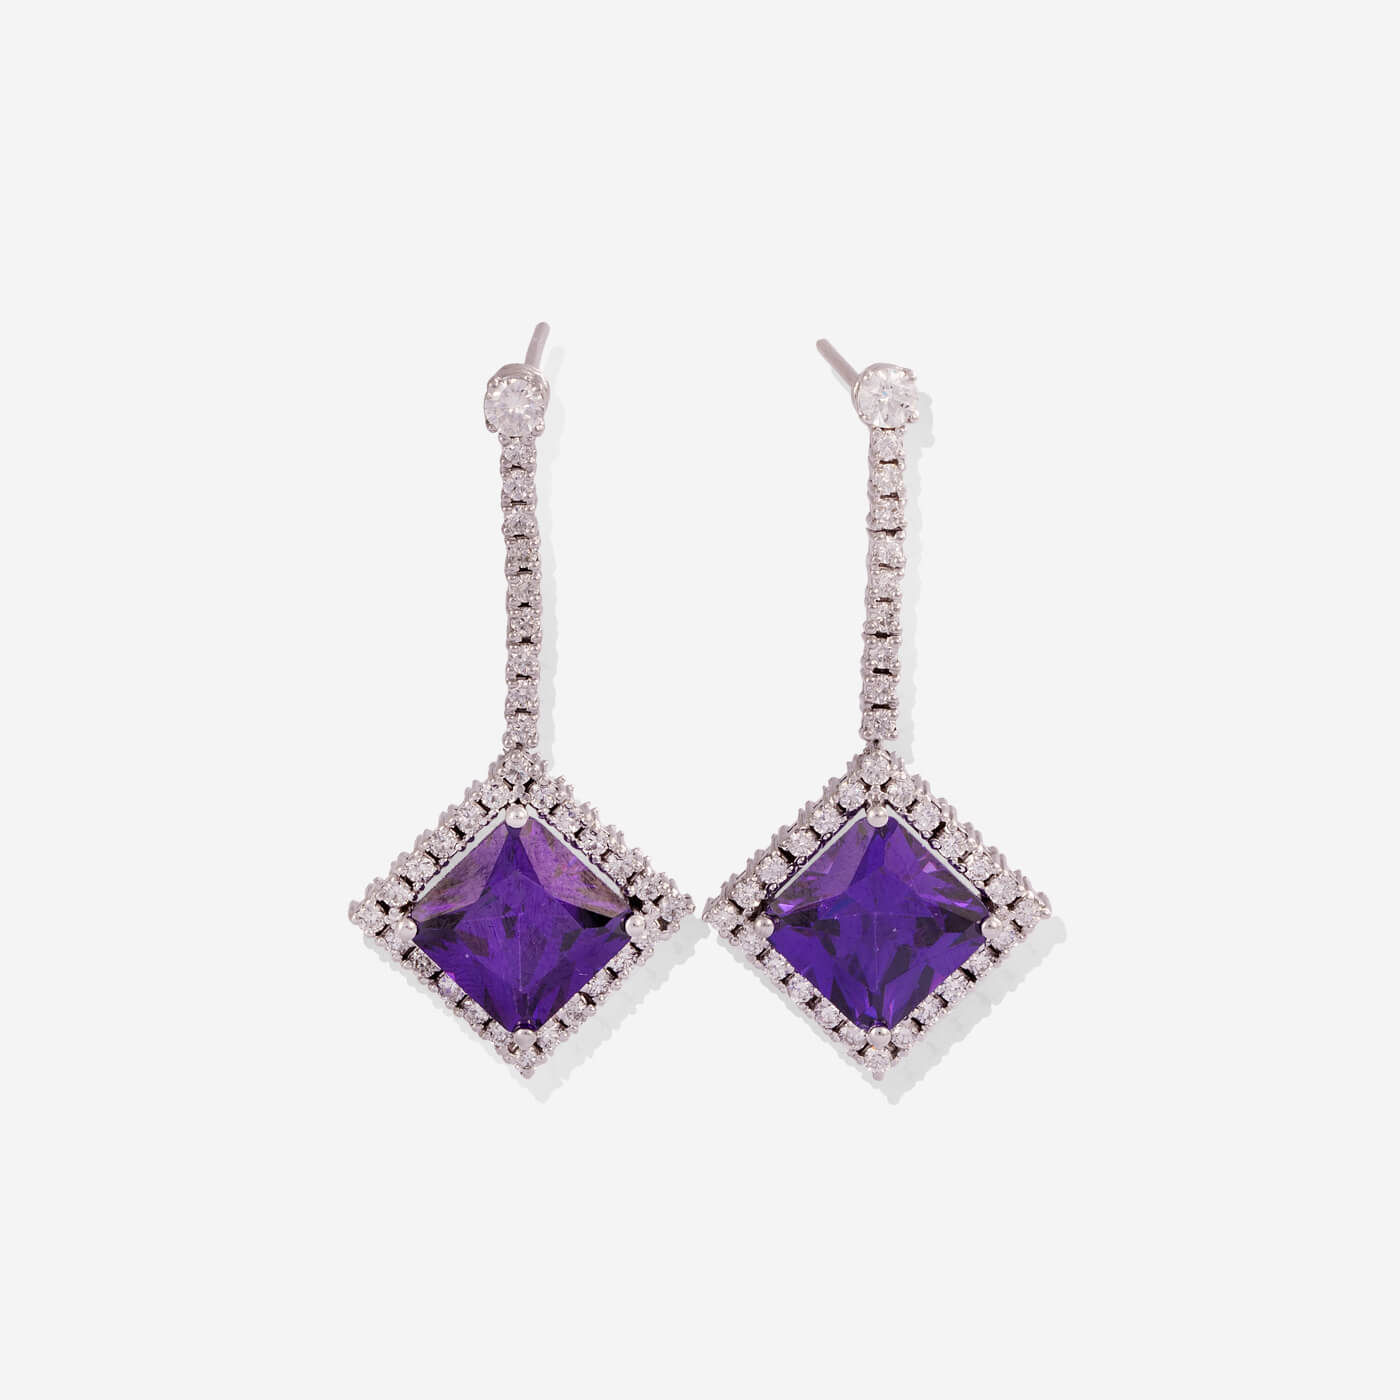 White Gold Square Amethysts With Diamonds Earrings - Ref: RK02677